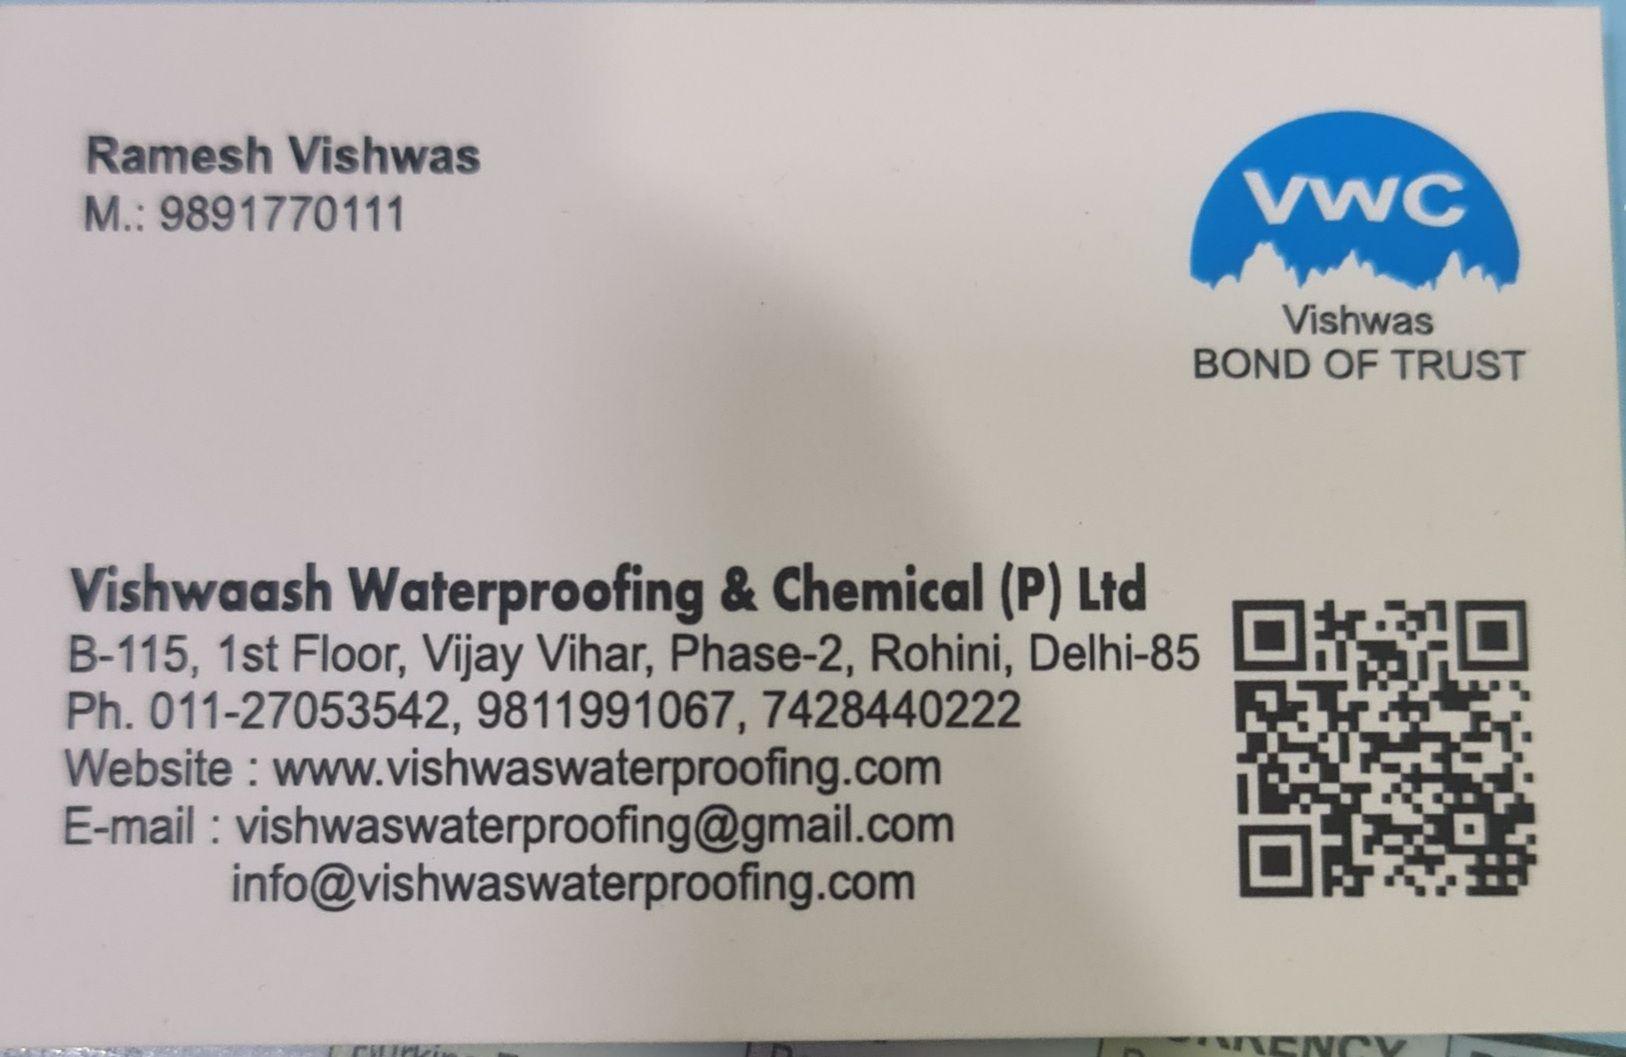 VISHWAS WATER PROOFING AND CHEMICAL PVT LTD